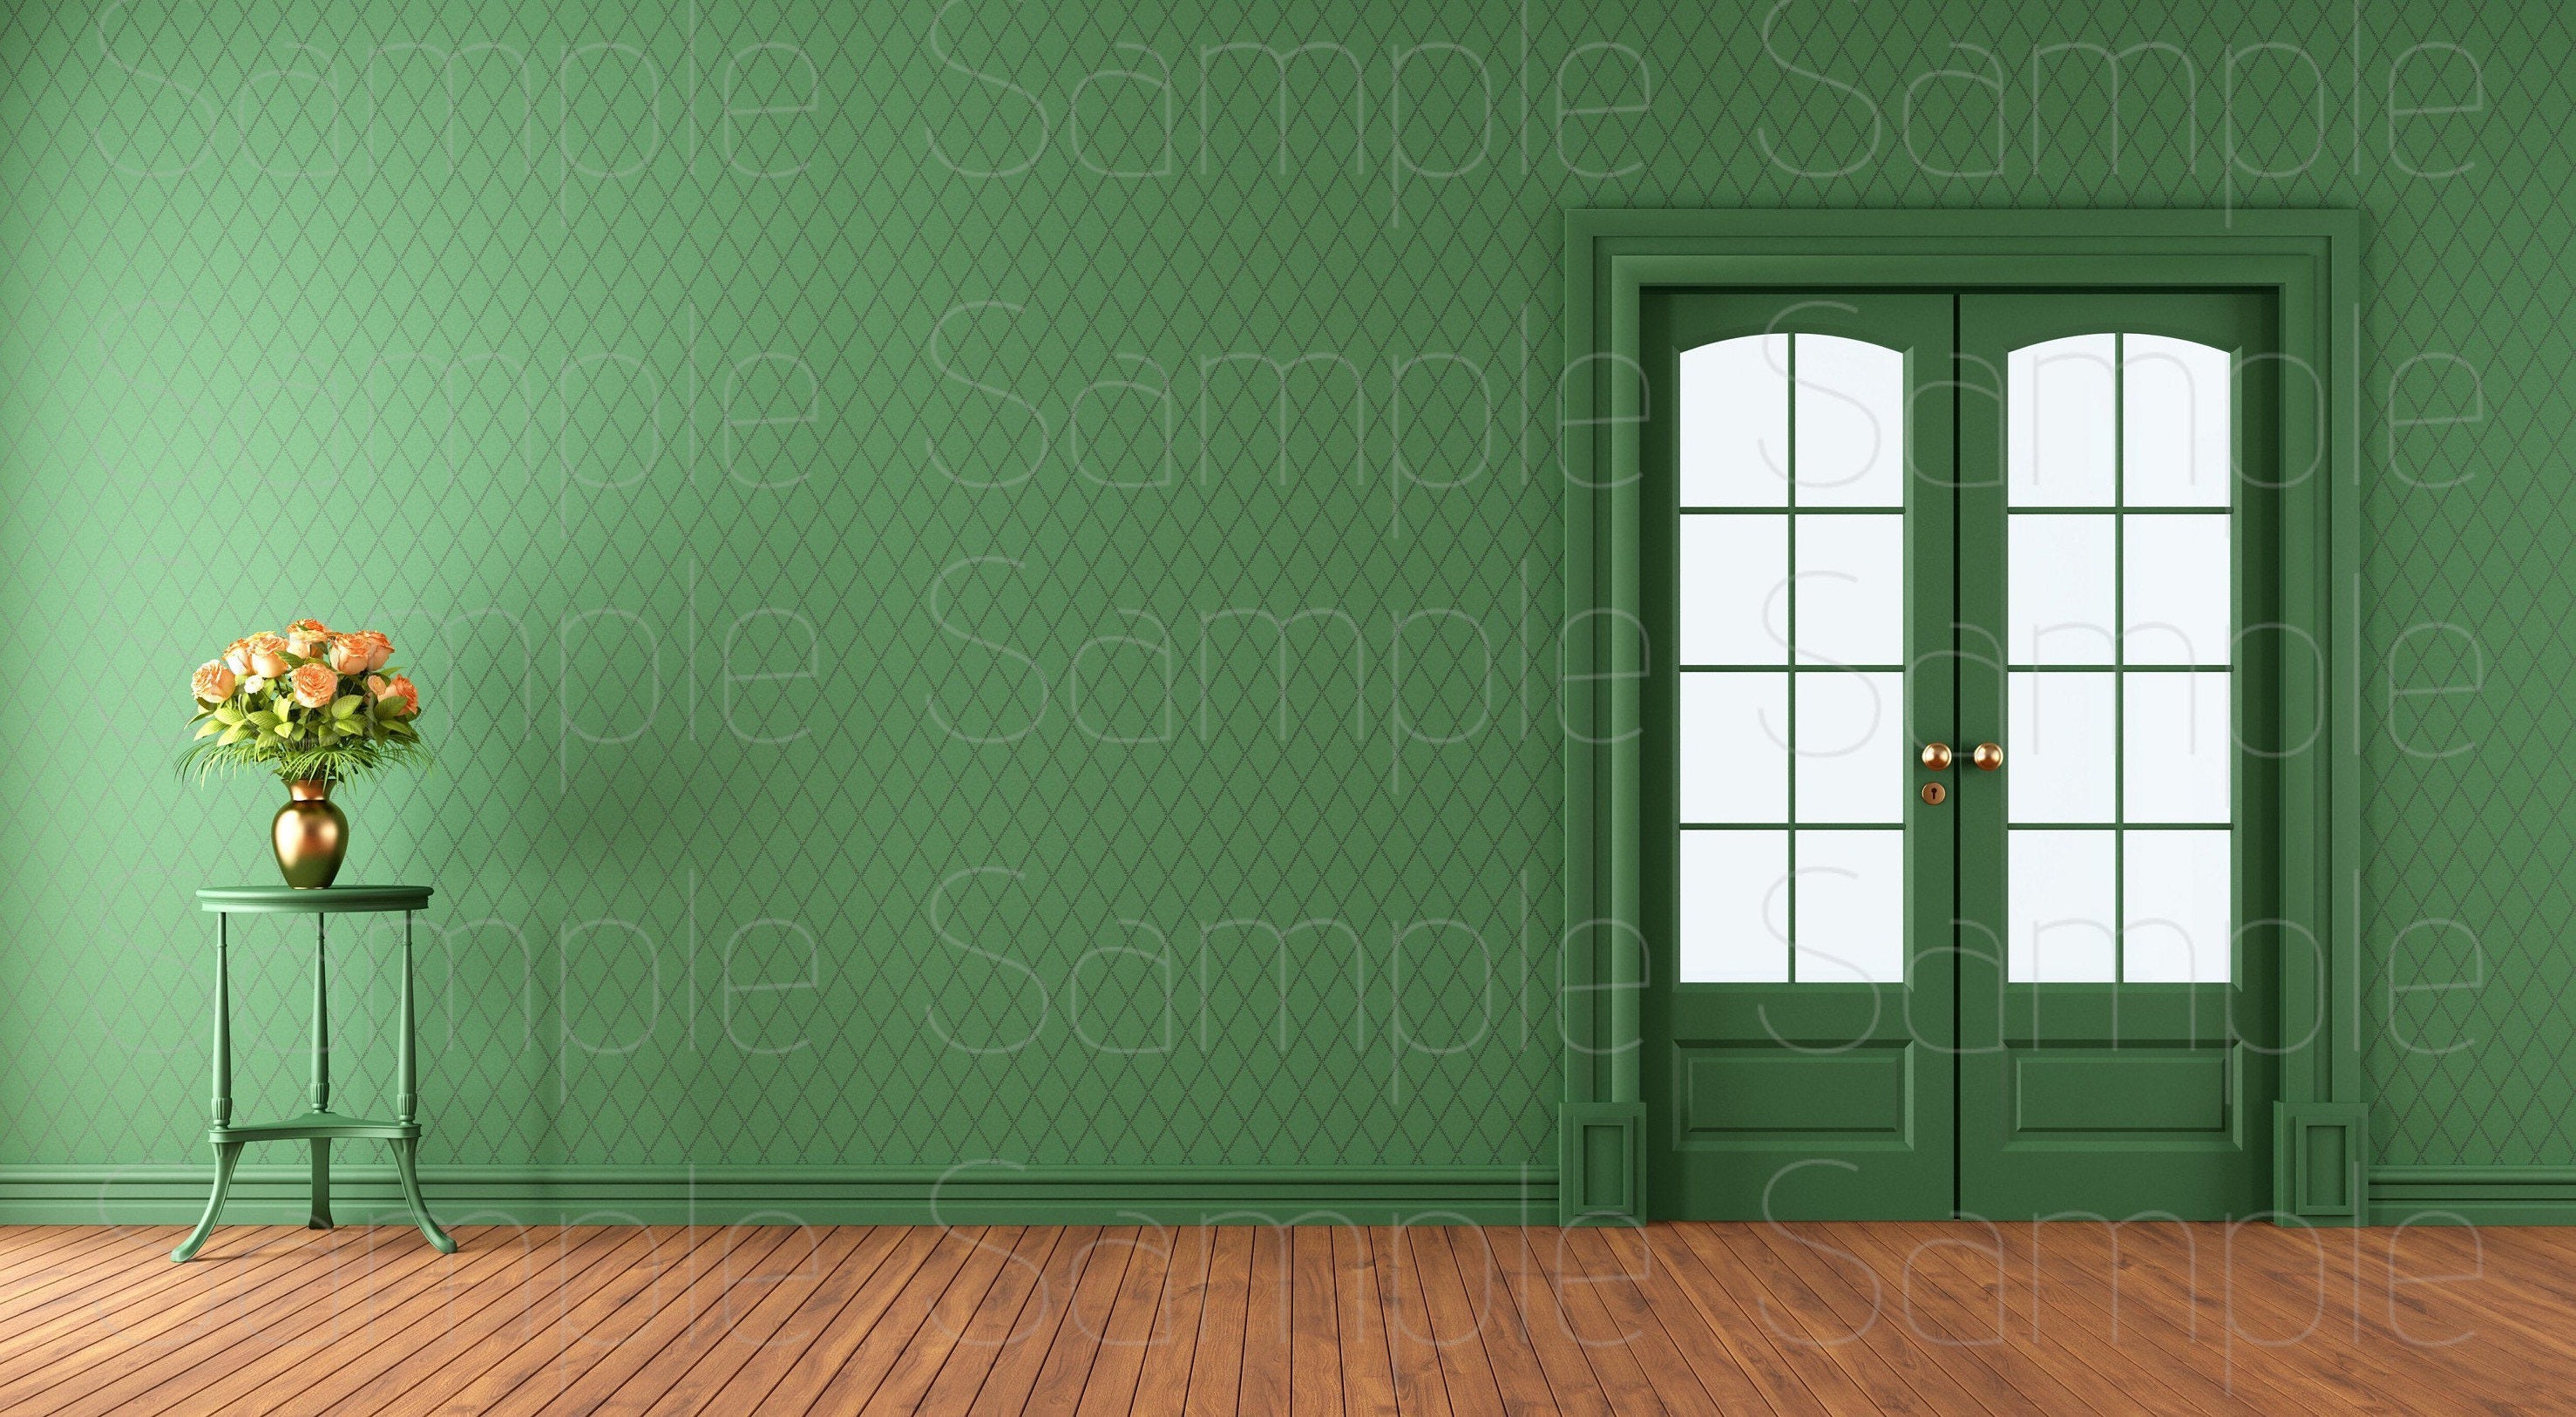 Background for Zoom Empty Room With Solid Green Wall - Etsy